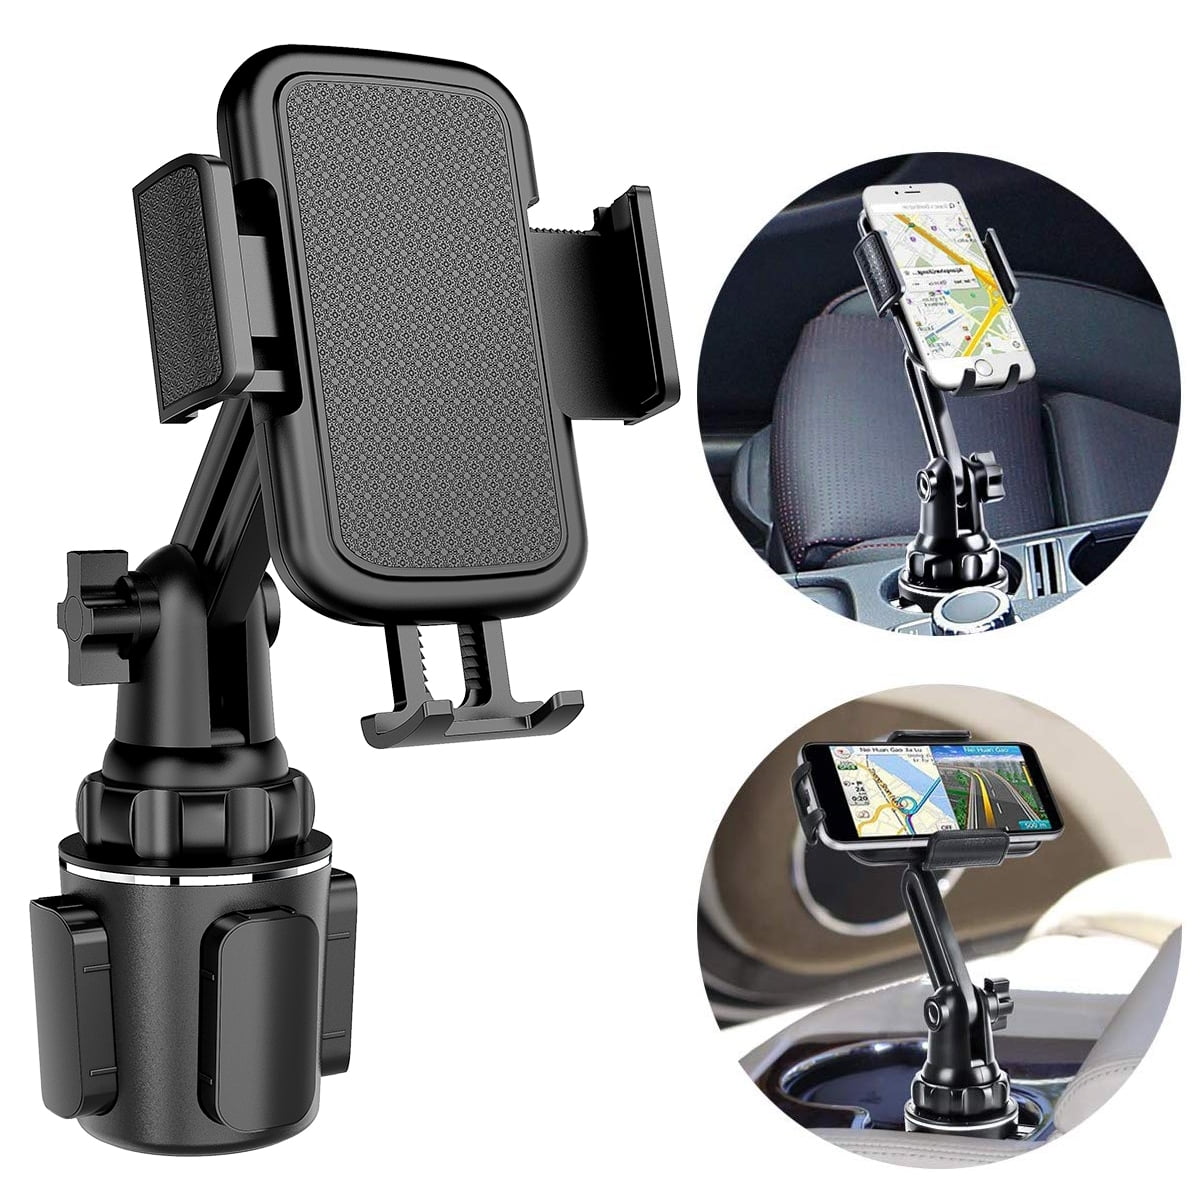 Universal Car Cup Phone Holder for Pop Out Stand Air Vent Pop Car Cradle Car Mount for Cell Phone iPhone Xs/XS Max/X/8/7 Plus/Galaxy S10 S9 Google and More Cup Holder Pop Clip Car Phone Mount